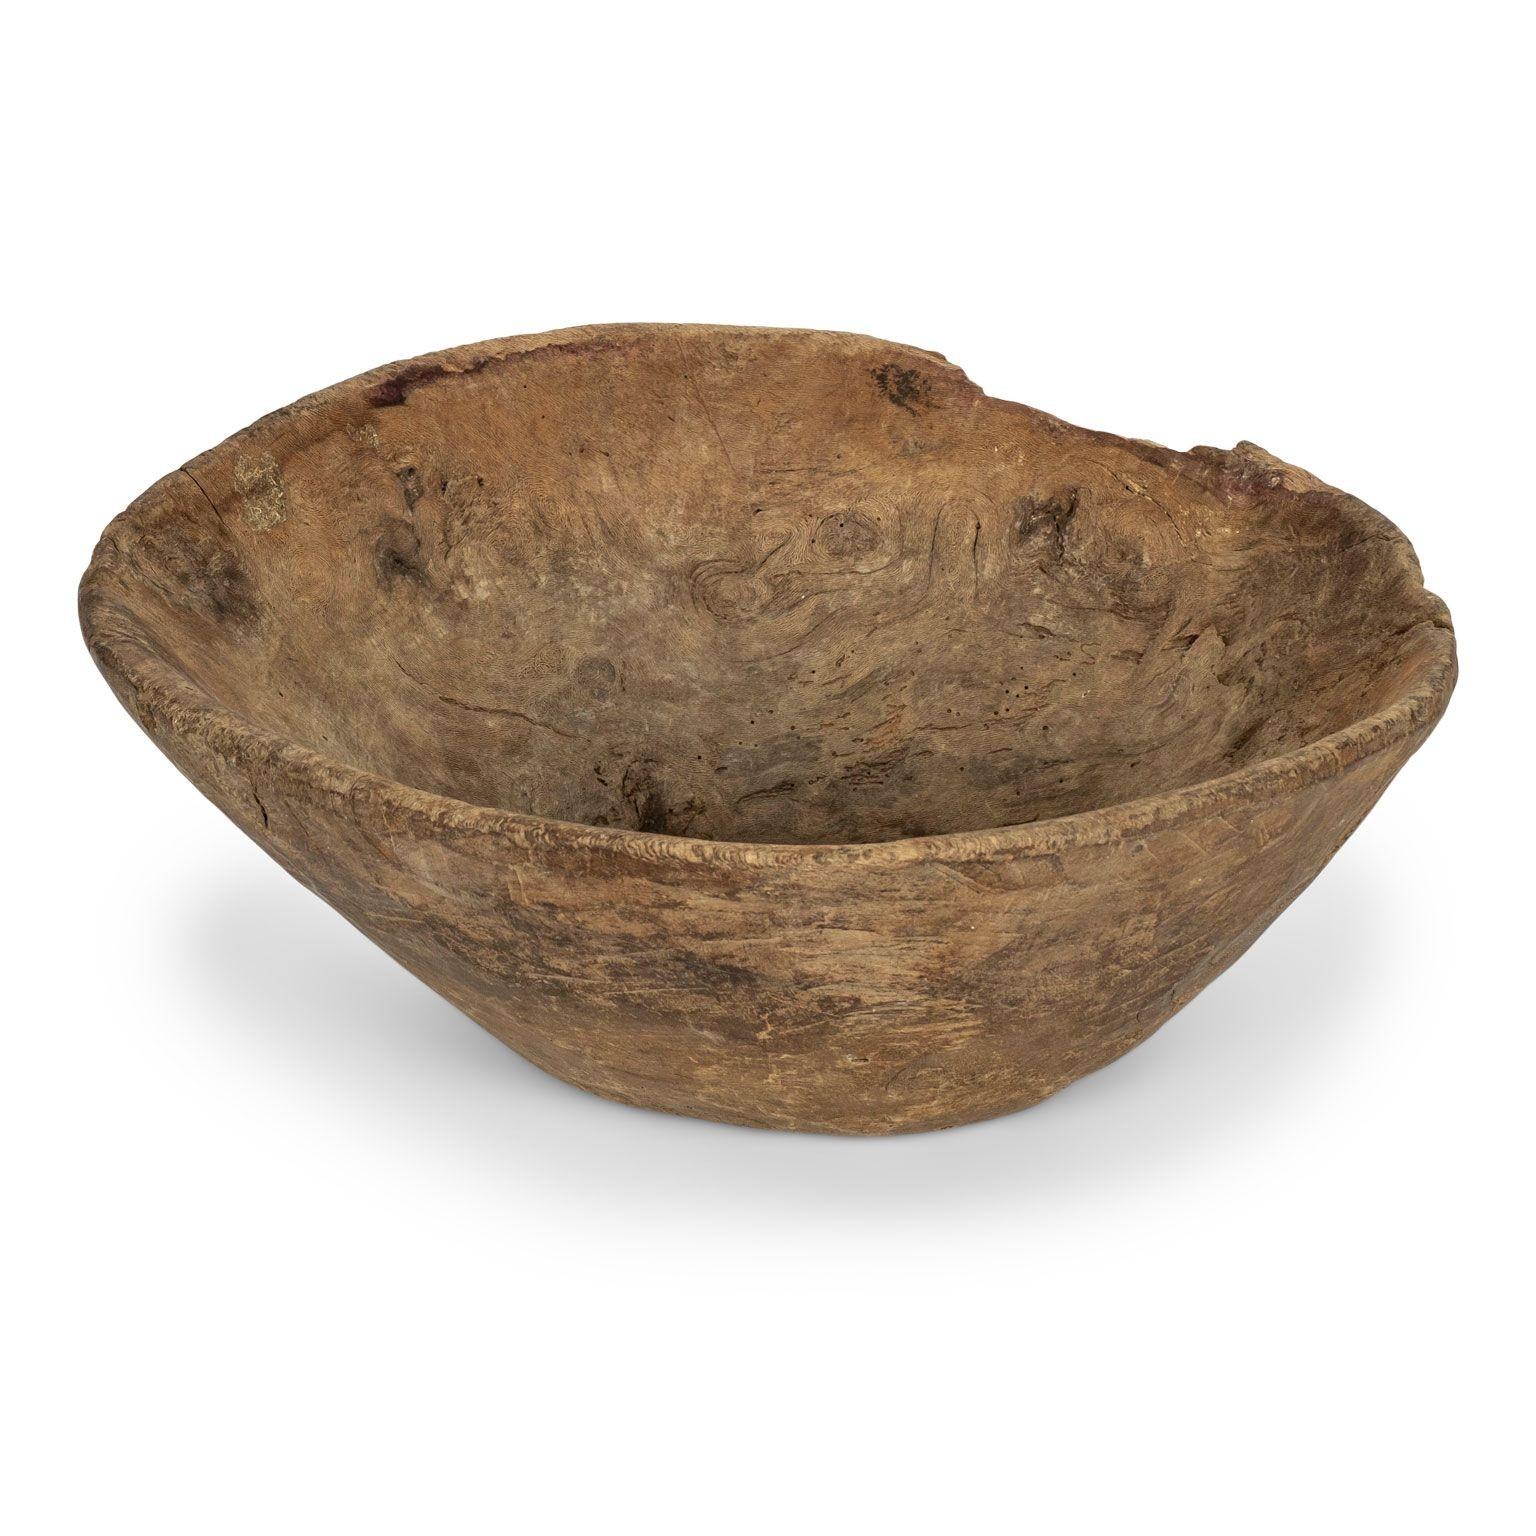 Large hand-carved Swedish root bowl dating to the 19th century. Irregular live-edge and beautiful patina.